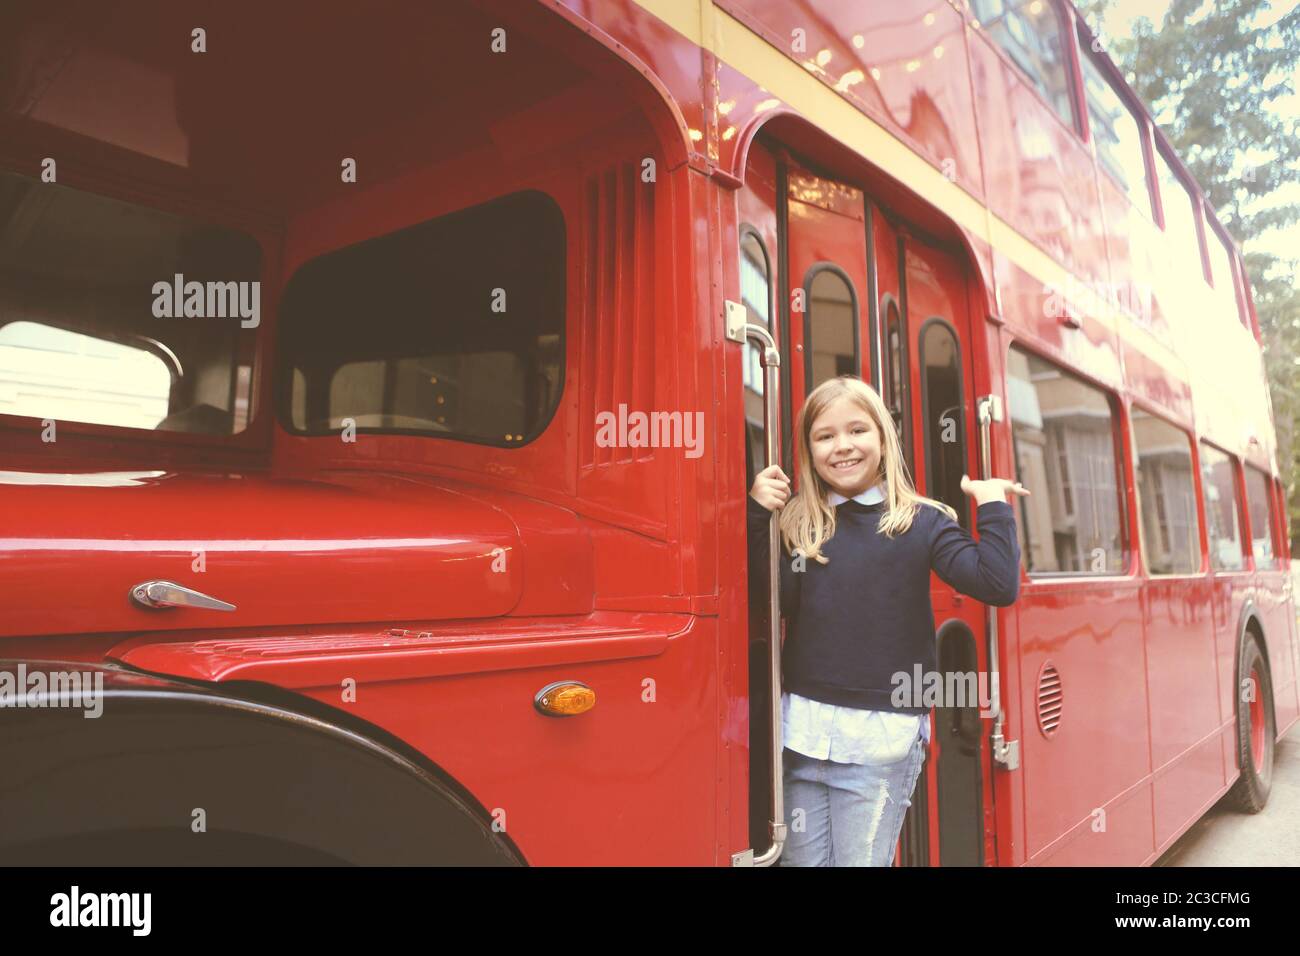 Preteen girl in entrance of red bus Stock Photo